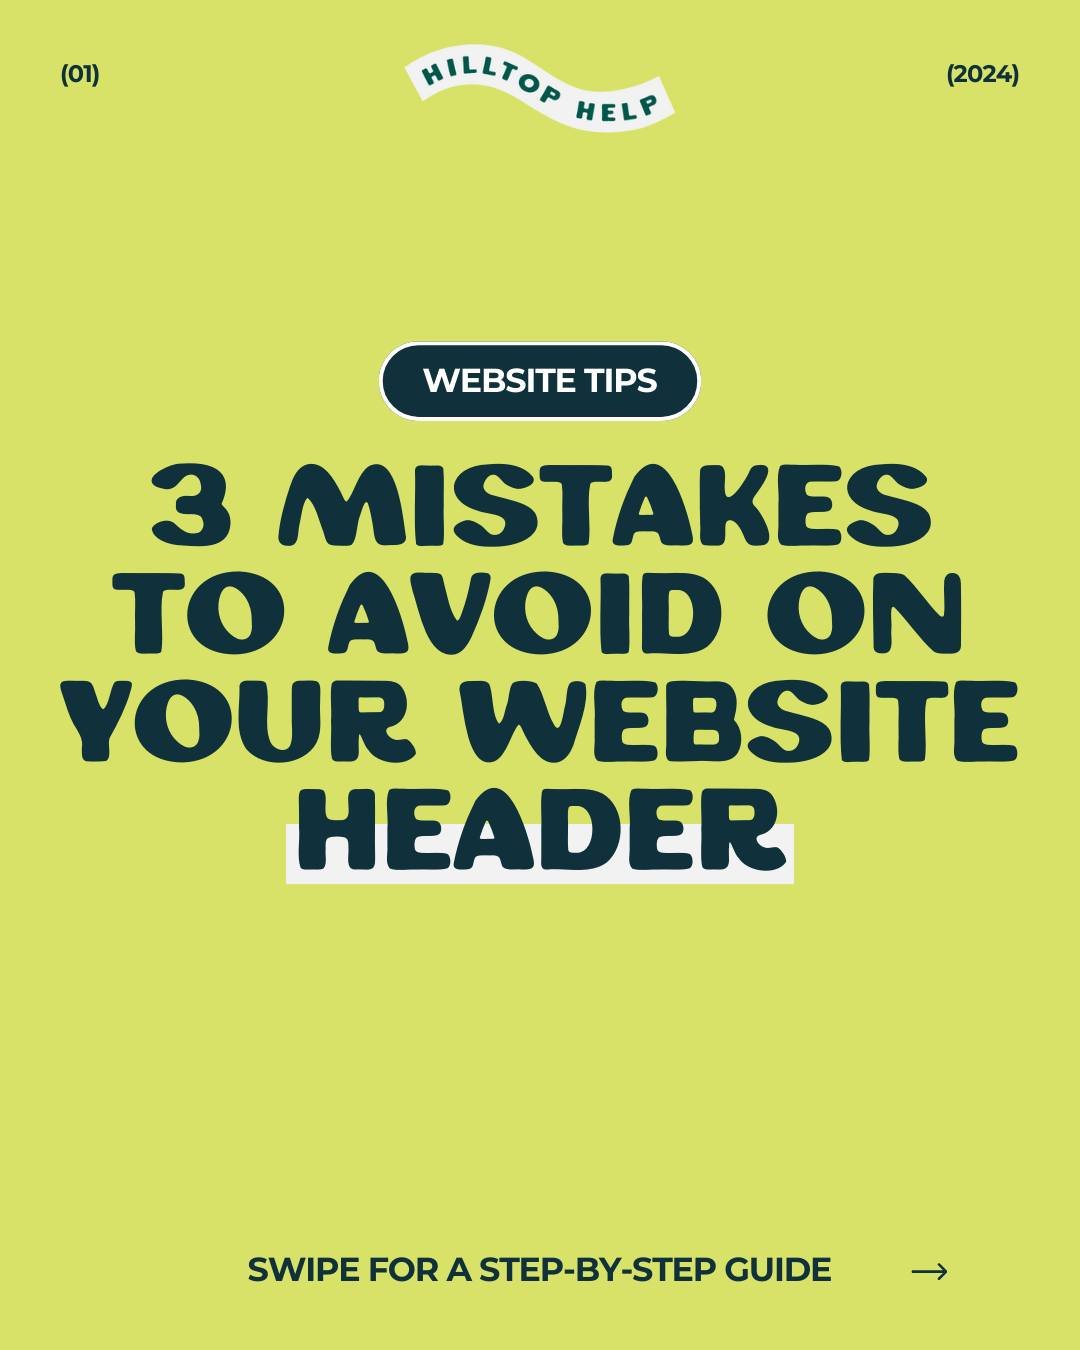 If you want to start converting website visitors into paying customers, you&rsquo;ve got to have a super straightforward header. ⁣⁣
⁣⁣
You&rsquo;ve spent so much time and effort to get people to your website. The last thing you want to do is overwhel